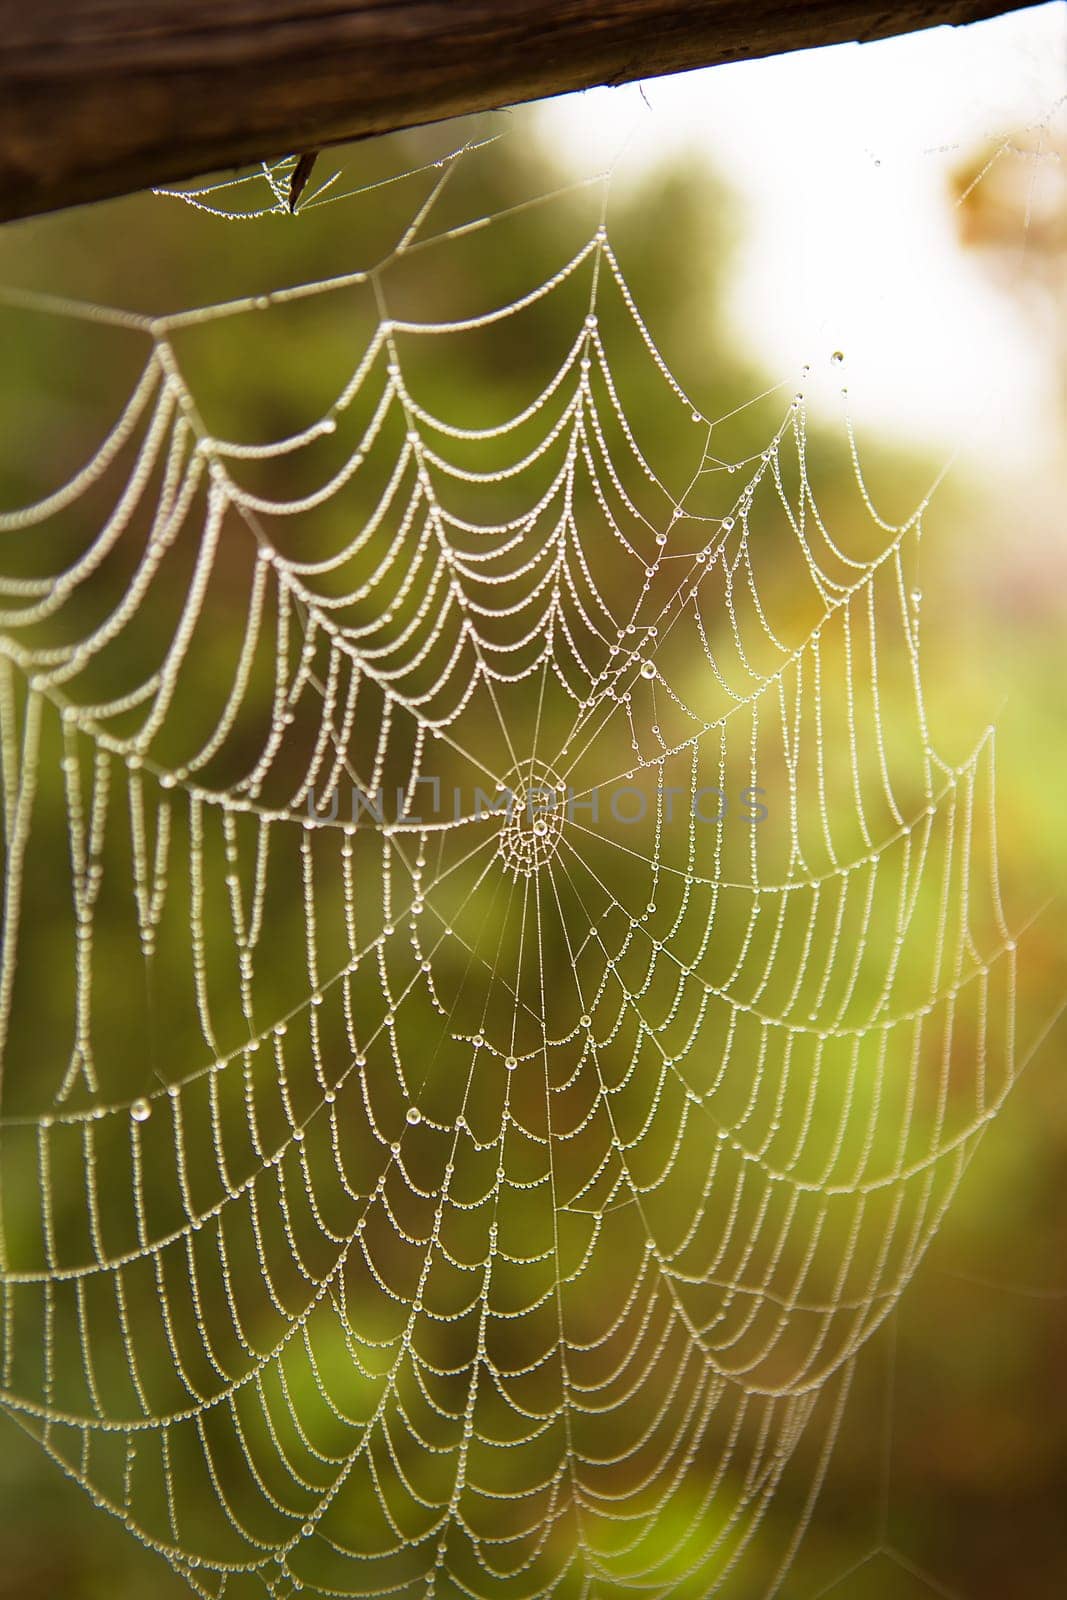 morning dew on a spider web, close-up by sfinks